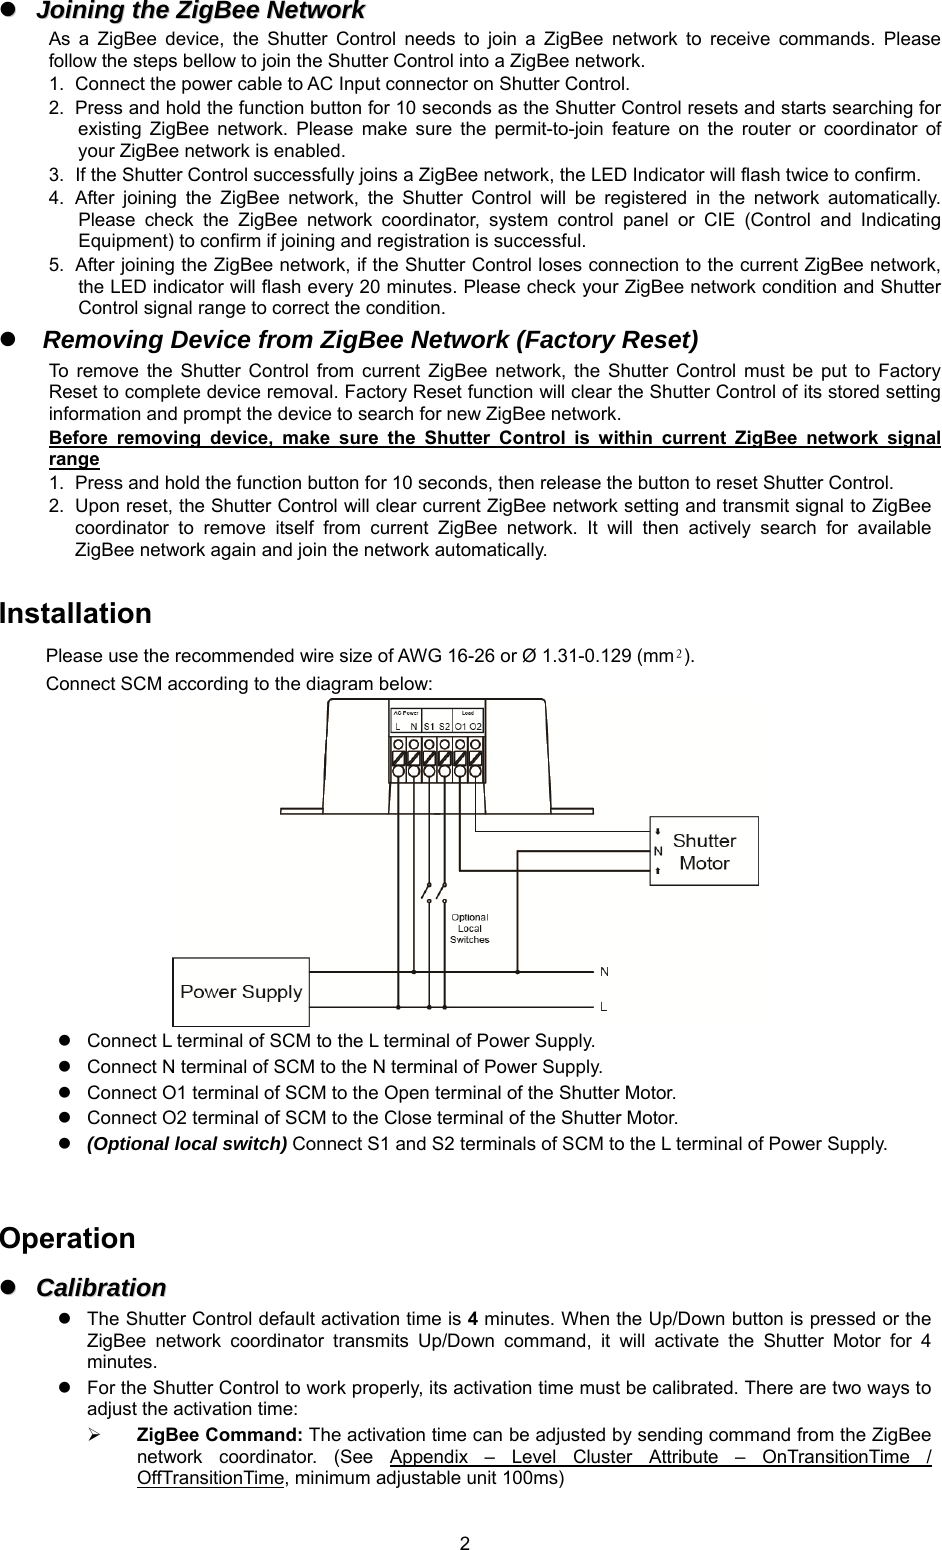 2JJooiinniinngg  tthhee  ZZiiggBBeeee  NNeettwwoorrkkAs  a  ZigBee  device,  the  Shutter  Control  needs  to  join  a  ZigBee  network  to  receive  commands.  Please follow the steps bellow to join the Shutter Control into a ZigBee network. 1. Connect the power cable to AC Input connector on Shutter Control.2. Press and hold the function button for 10 seconds as the Shutter Control resets and starts searching forexisting  ZigBee  network.  Please  make  sure  the  permit-to-join  feature  on  the  router  or  coordinator  ofyour ZigBee network is enabled.3. If the Shutter Control successfully joins a ZigBee network, the LED Indicator will flash twice to confirm.4. After  joining  the  ZigBee  network,  the  Shutter  Control  will  be  registered  in  the  network  automatically.Please  check  the  ZigBee  network  coordinator,  system  control  panel  or  CIE  (Control  and  IndicatingEquipment) to confirm if joining and registration is successful.5. After joining the ZigBee network, if the Shutter Control loses connection to the current ZigBee network,the LED indicator will flash every 20 minutes. Please check your ZigBee network condition and ShutterControl signal range to correct the condition.Removing Device from ZigBee Network (Factory Reset)To  remove  the  Shutter  Control  from  current  ZigBee  network,  the  Shutter  Control  must  be  put  to  FactoryReset to complete device removal. Factory Reset function will clear the Shutter Control of its stored settinginformation and prompt the device to search for new ZigBee network.Before  removing  device,  make  sure  the  Shutter  Control  is  within  current  ZigBee  network  signalrange1. Press and hold the function button for 10 seconds, then release the button to reset Shutter Control.2. Upon reset, the Shutter Control will clear current ZigBee network setting and transmit signal to ZigBeecoordinator  to  remove  itself  from  current  ZigBee  network.  It  will  then  actively  search  for  availableZigBee network again and join the network automatically.Installation Please use the recommended wire size of AWG 16-26 or Ø 1.31-0.129 (mm²). Connect SCM according to the diagram below: Connect L terminal of SCM to the L terminal of Power Supply.Connect N terminal of SCM to the N terminal of Power Supply.Connect O1 terminal of SCM to the Open terminal of the Shutter Motor.Connect O2 terminal of SCM to the Close terminal of the Shutter Motor.(Optional local switch) Connect S1 and S2 terminals of SCM to the L terminal of Power Supply.Operation CCaalliibbrraattiioonnThe Shutter Control default activation time is 4 minutes. When the Up/Down button is pressed or theZigBee  network  coordinator  transmits  Up/Down  command,  it  will  activate  the  Shutter  Motor  for  4minutes.For the Shutter Control to work properly, its activation time must be calibrated. There are two ways toadjust the activation time:ZigBee Command: The activation time can be adjusted by sending command from the ZigBeenetwork  coordinator.  (See  Appendix  –  Level  Cluster  Attribute  –  OnTransitionTime  /OffTransitionTime, minimum adjustable unit 100ms)